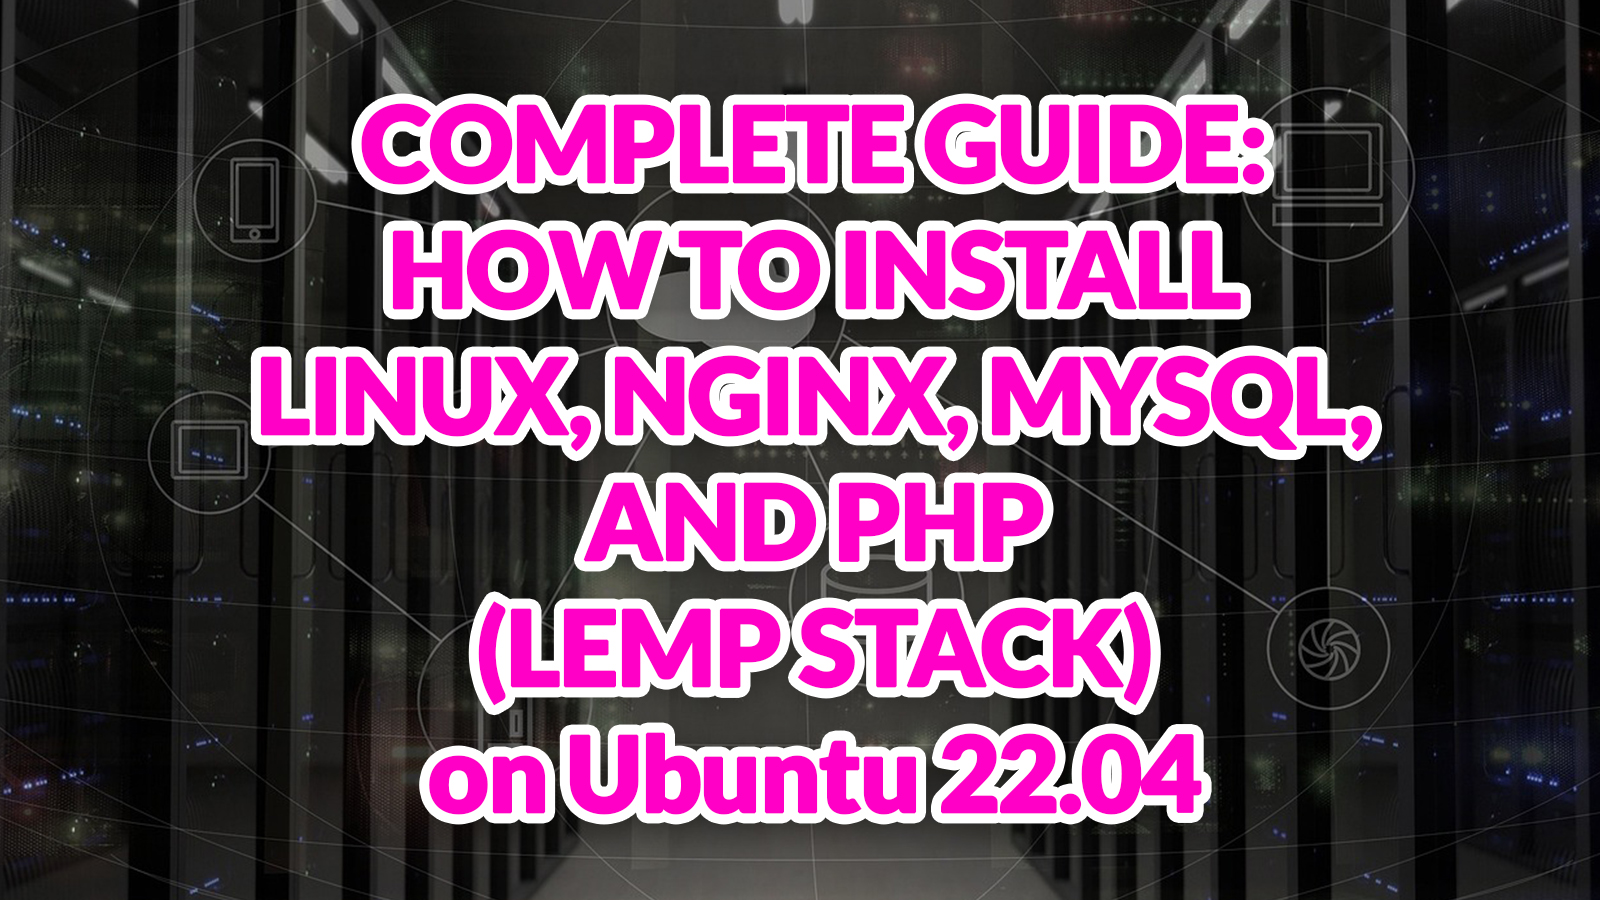 Complete Guide: How to Install Linux, NGINX, MariaDB, & PHP (LEMP Stack) on Ubuntu 22.04 Server